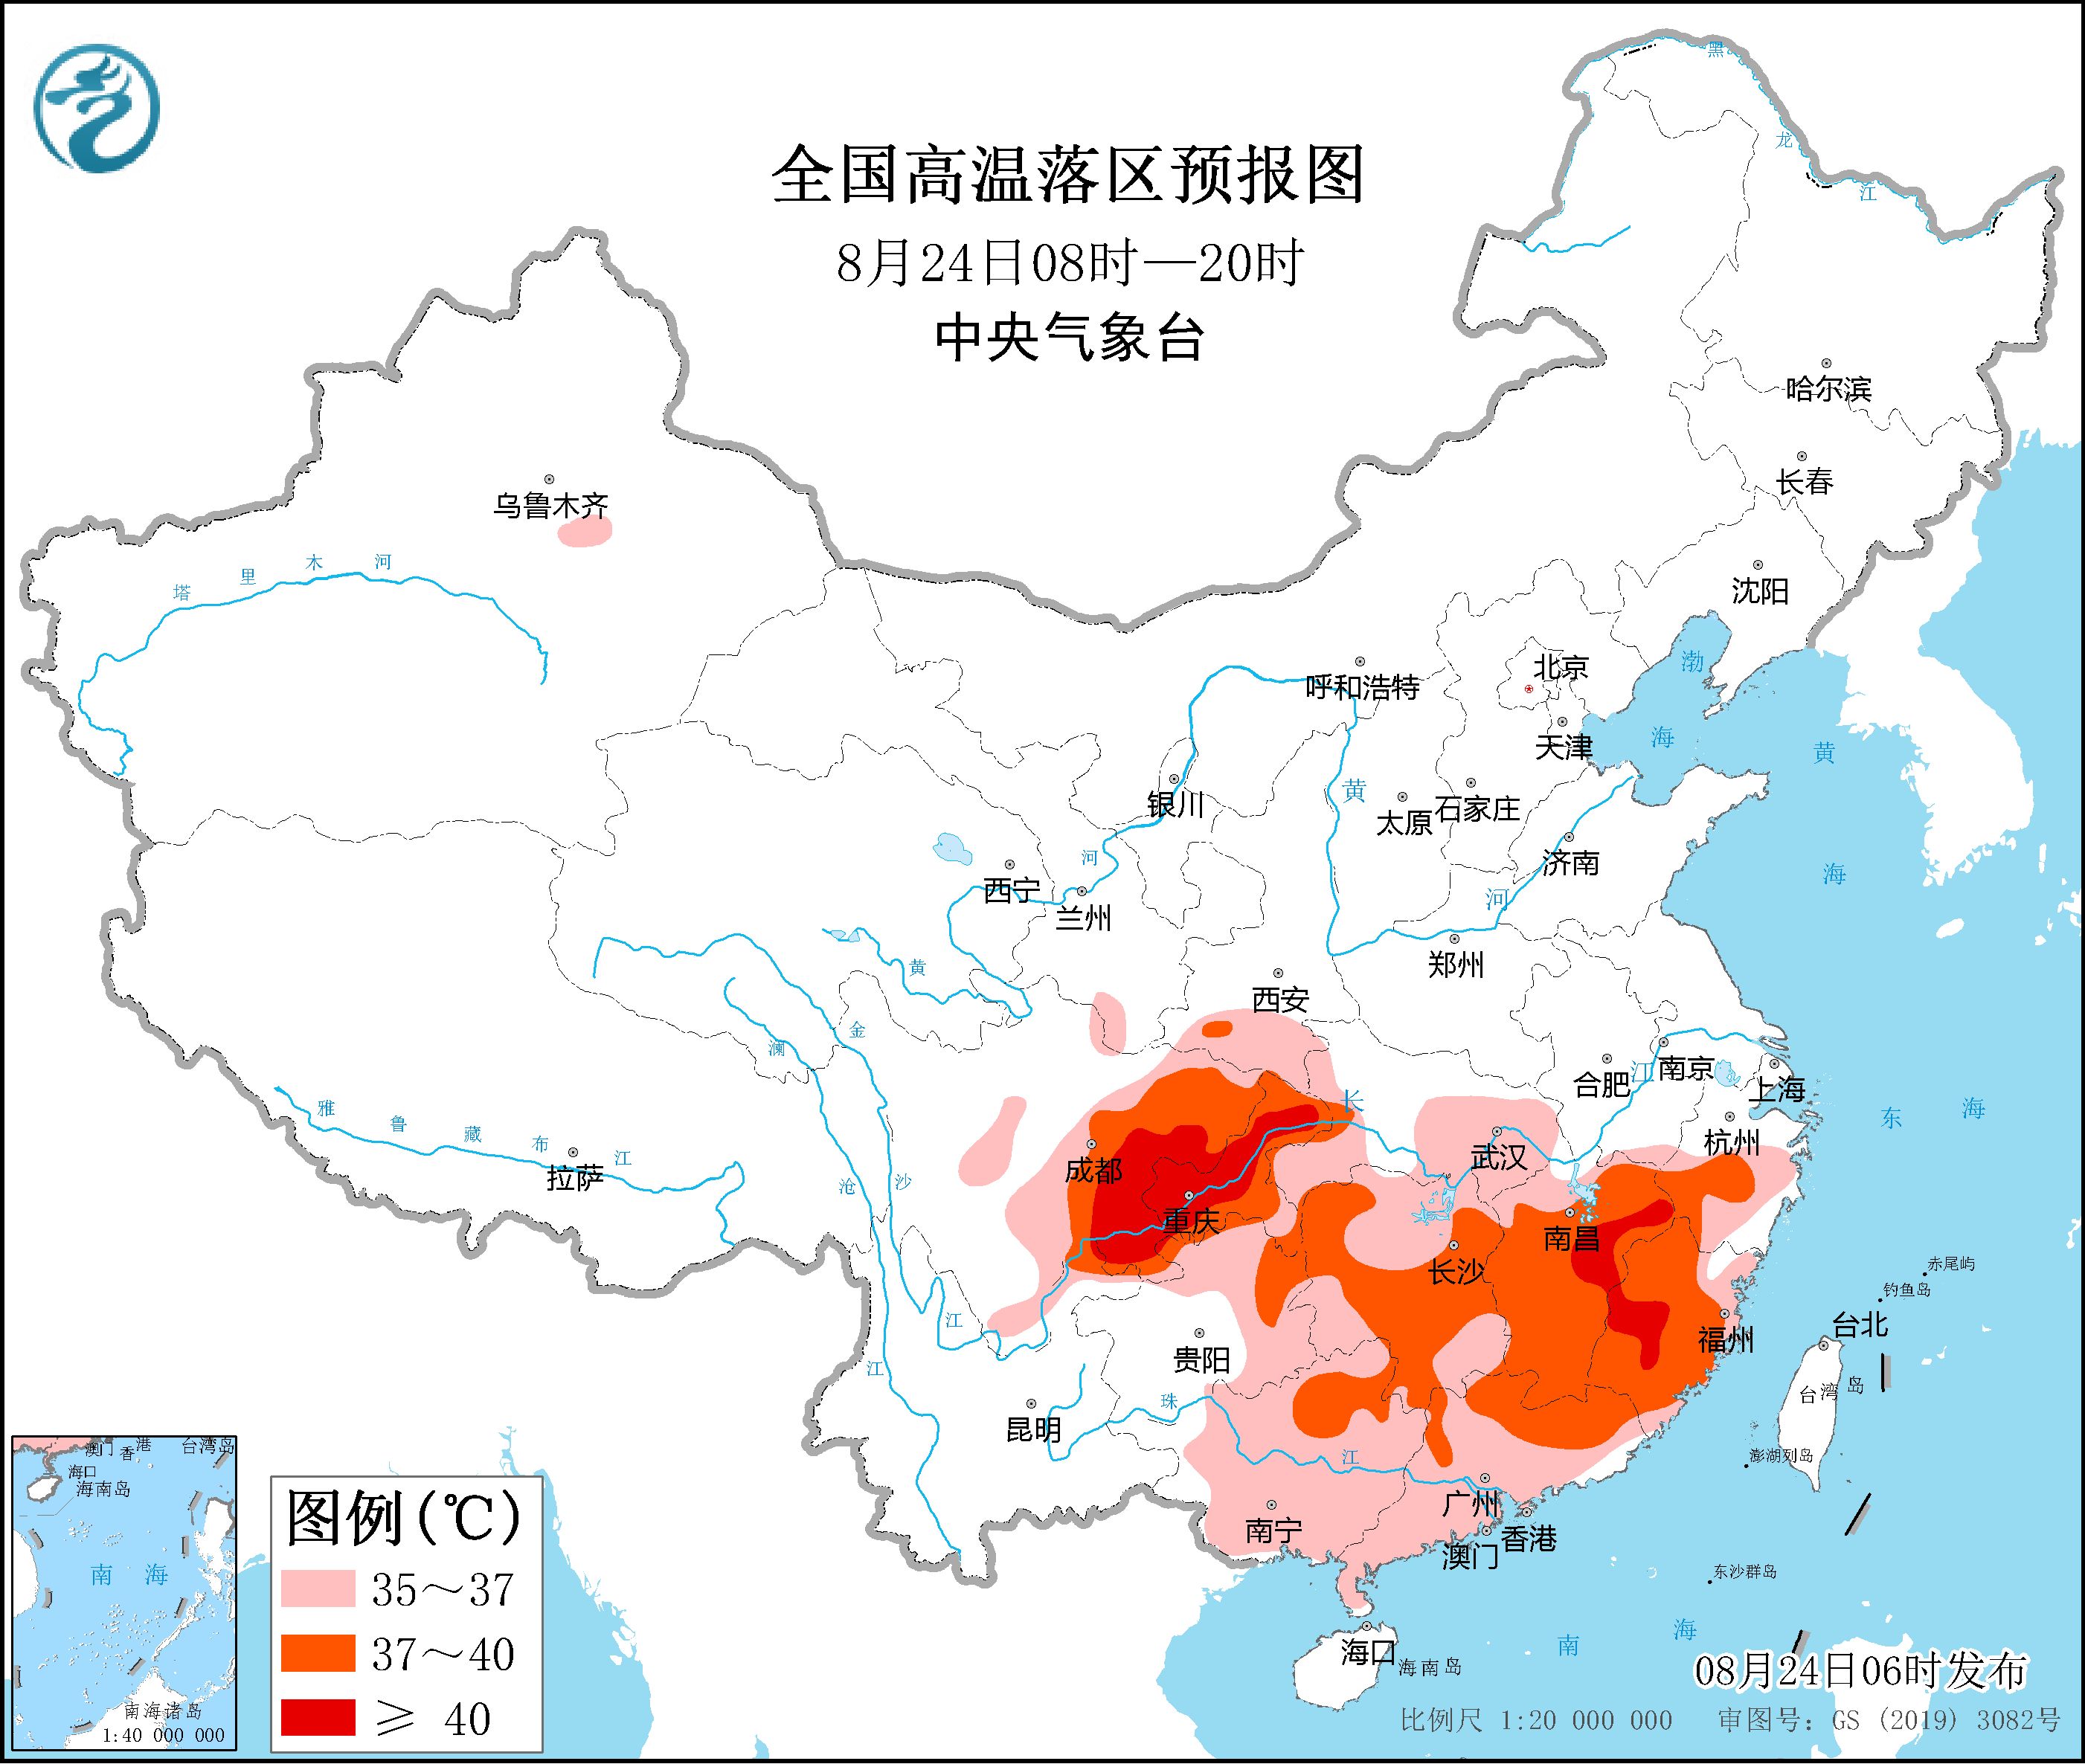 There is still more precipitation in eastern Northwest China, northern China and other places, and the 